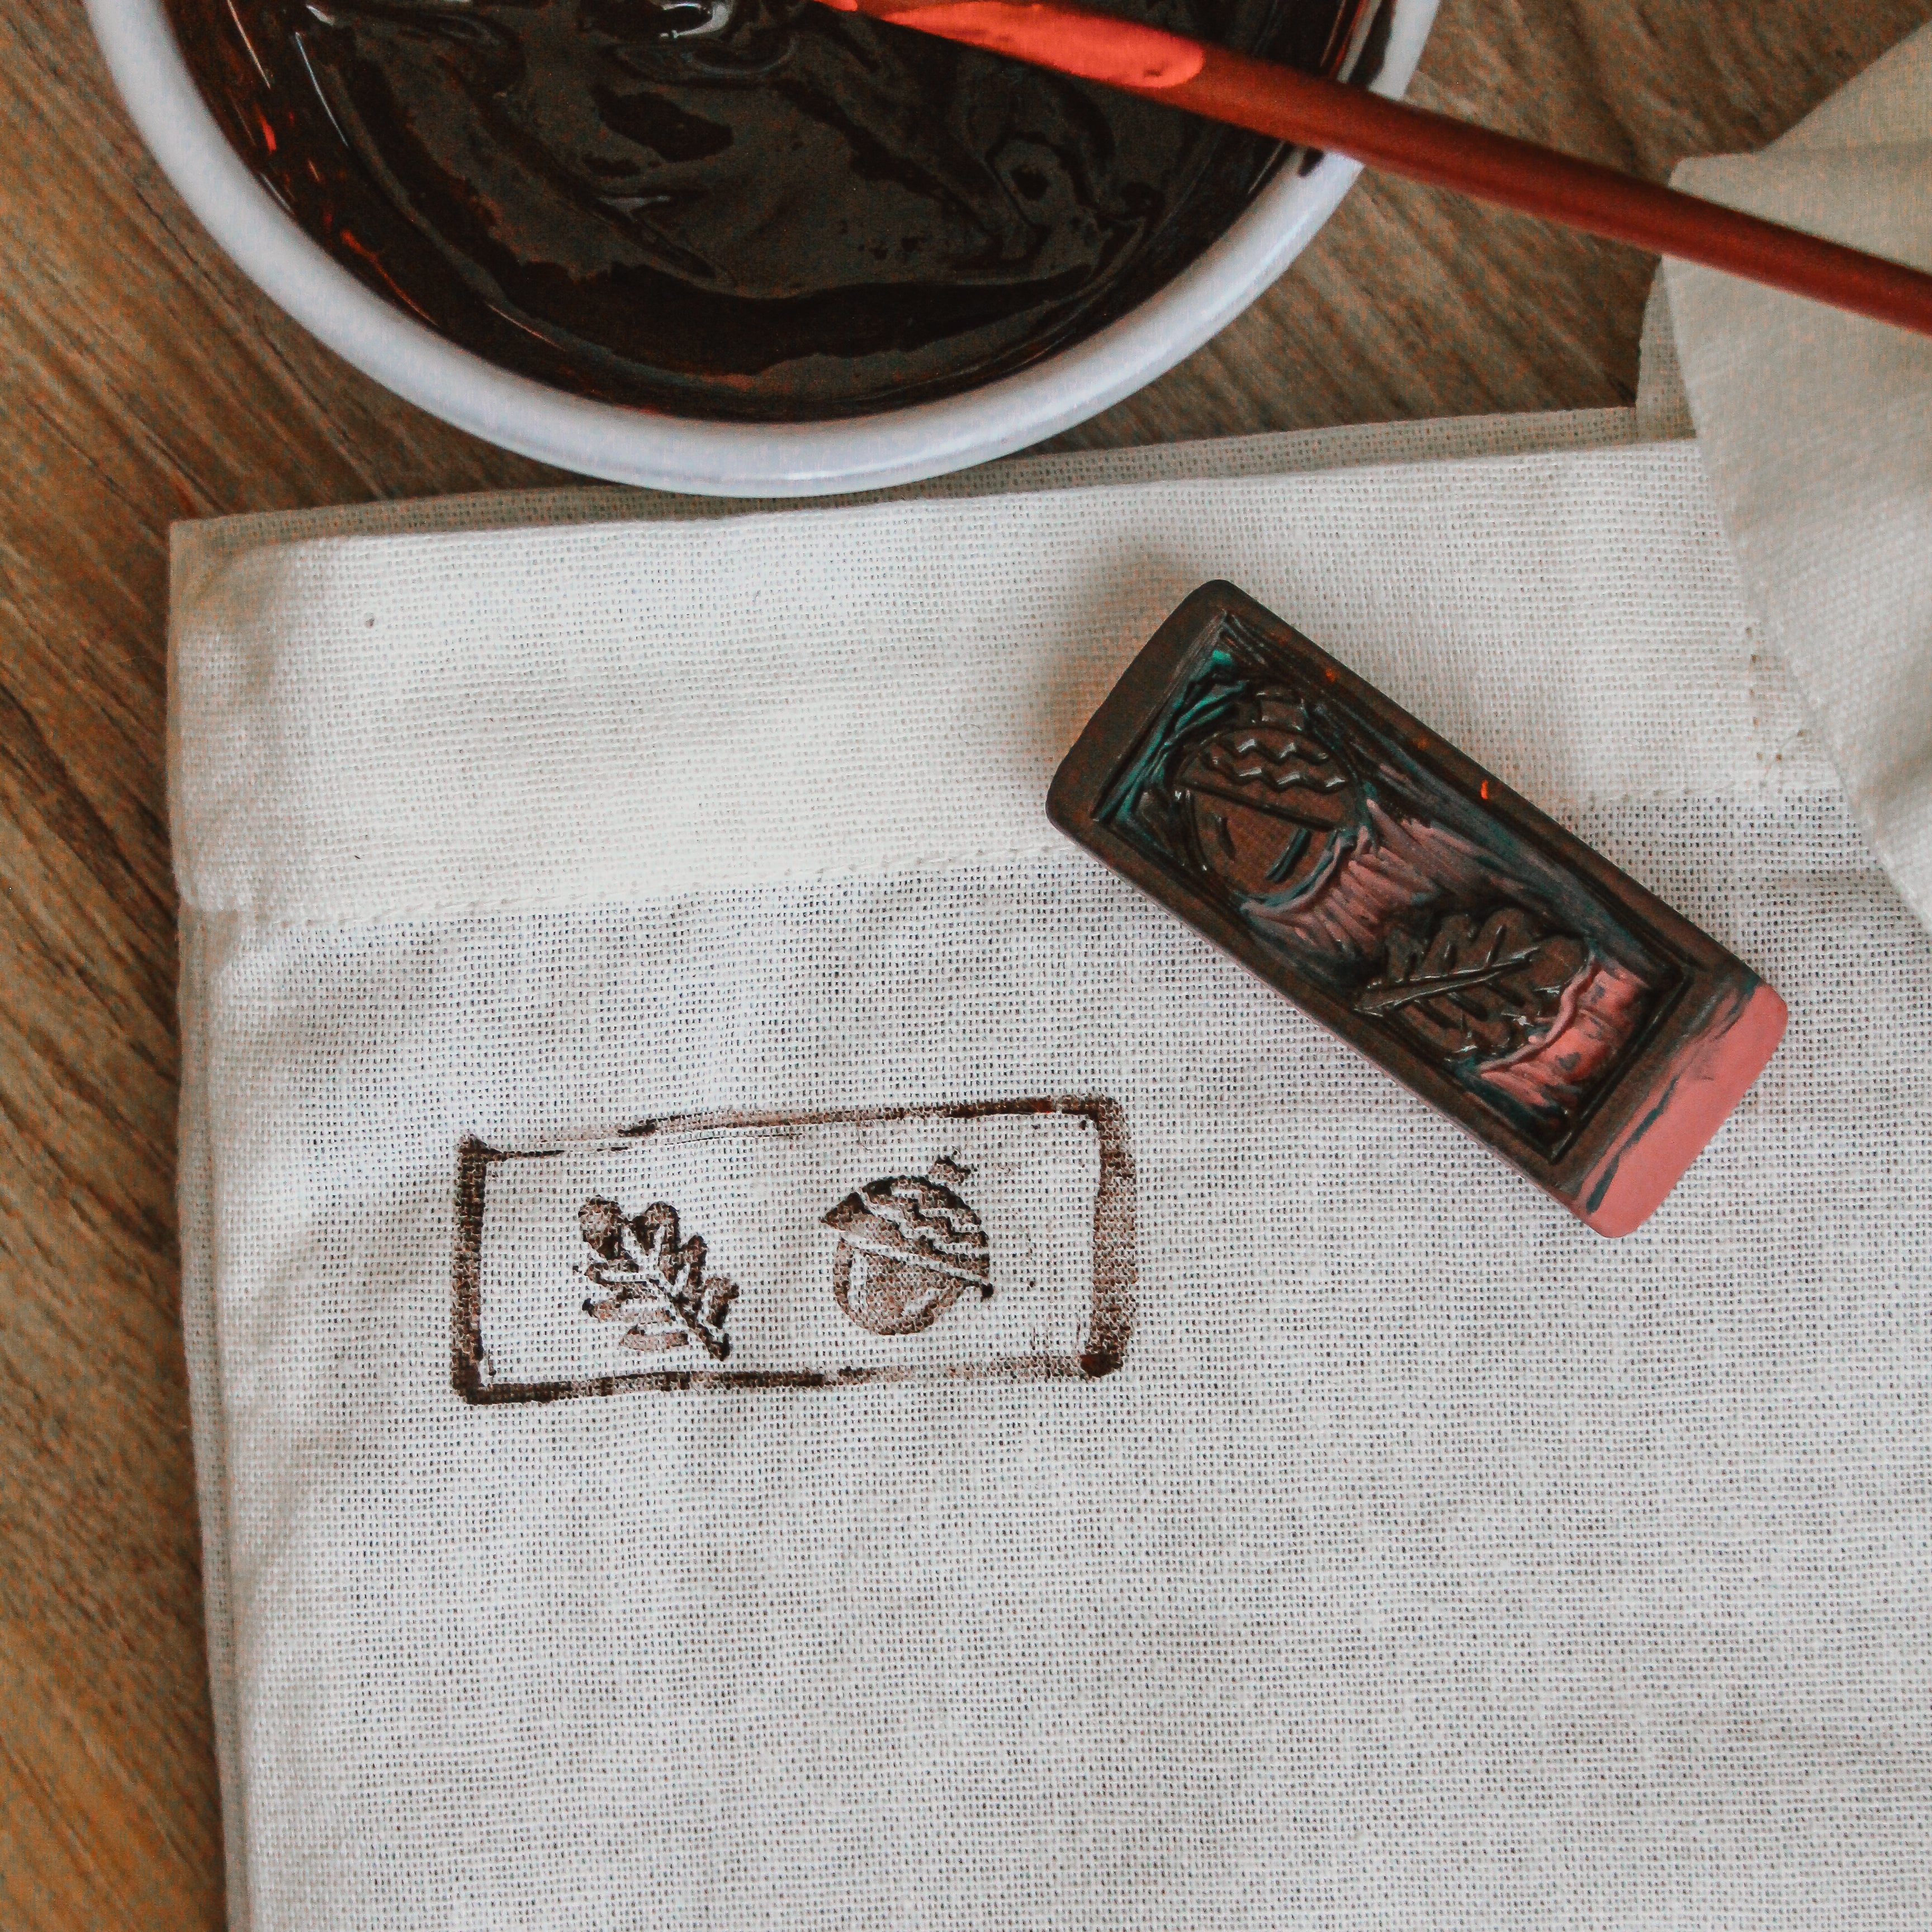 A carved stamp sits next to a freshly printed bag.